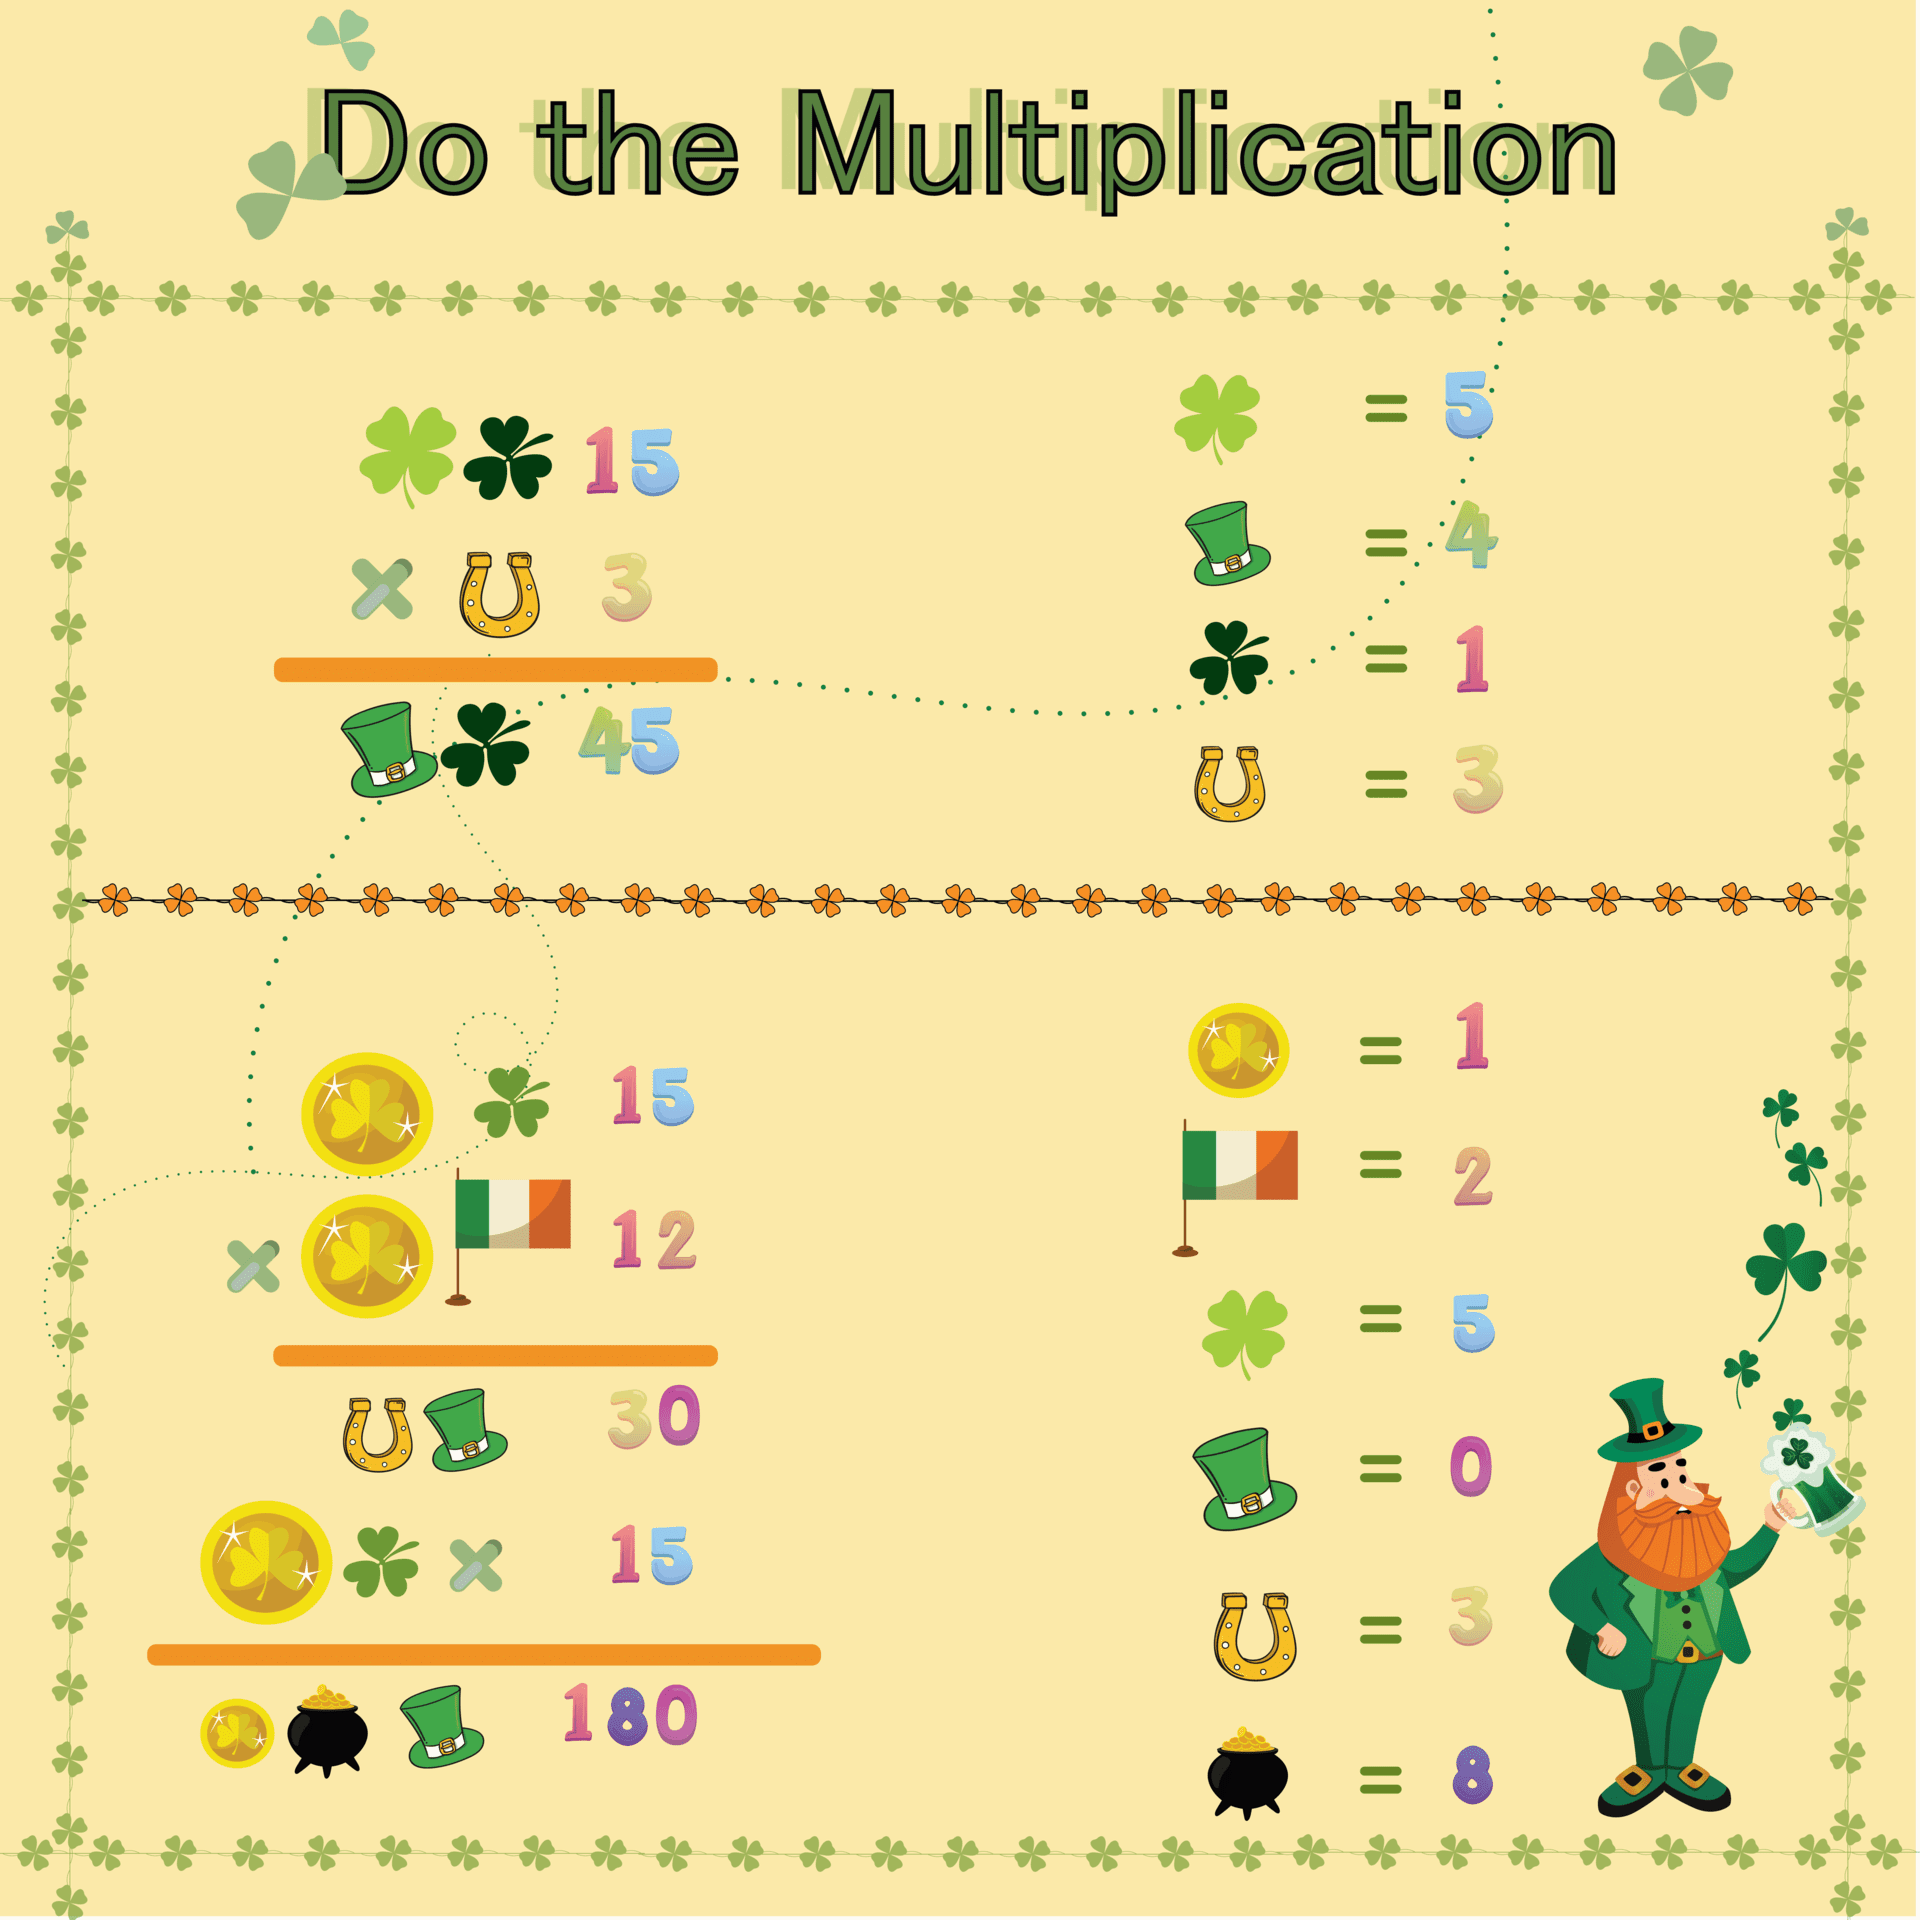 Explaining Simple Multiplication with St. Patrick's Day Theme